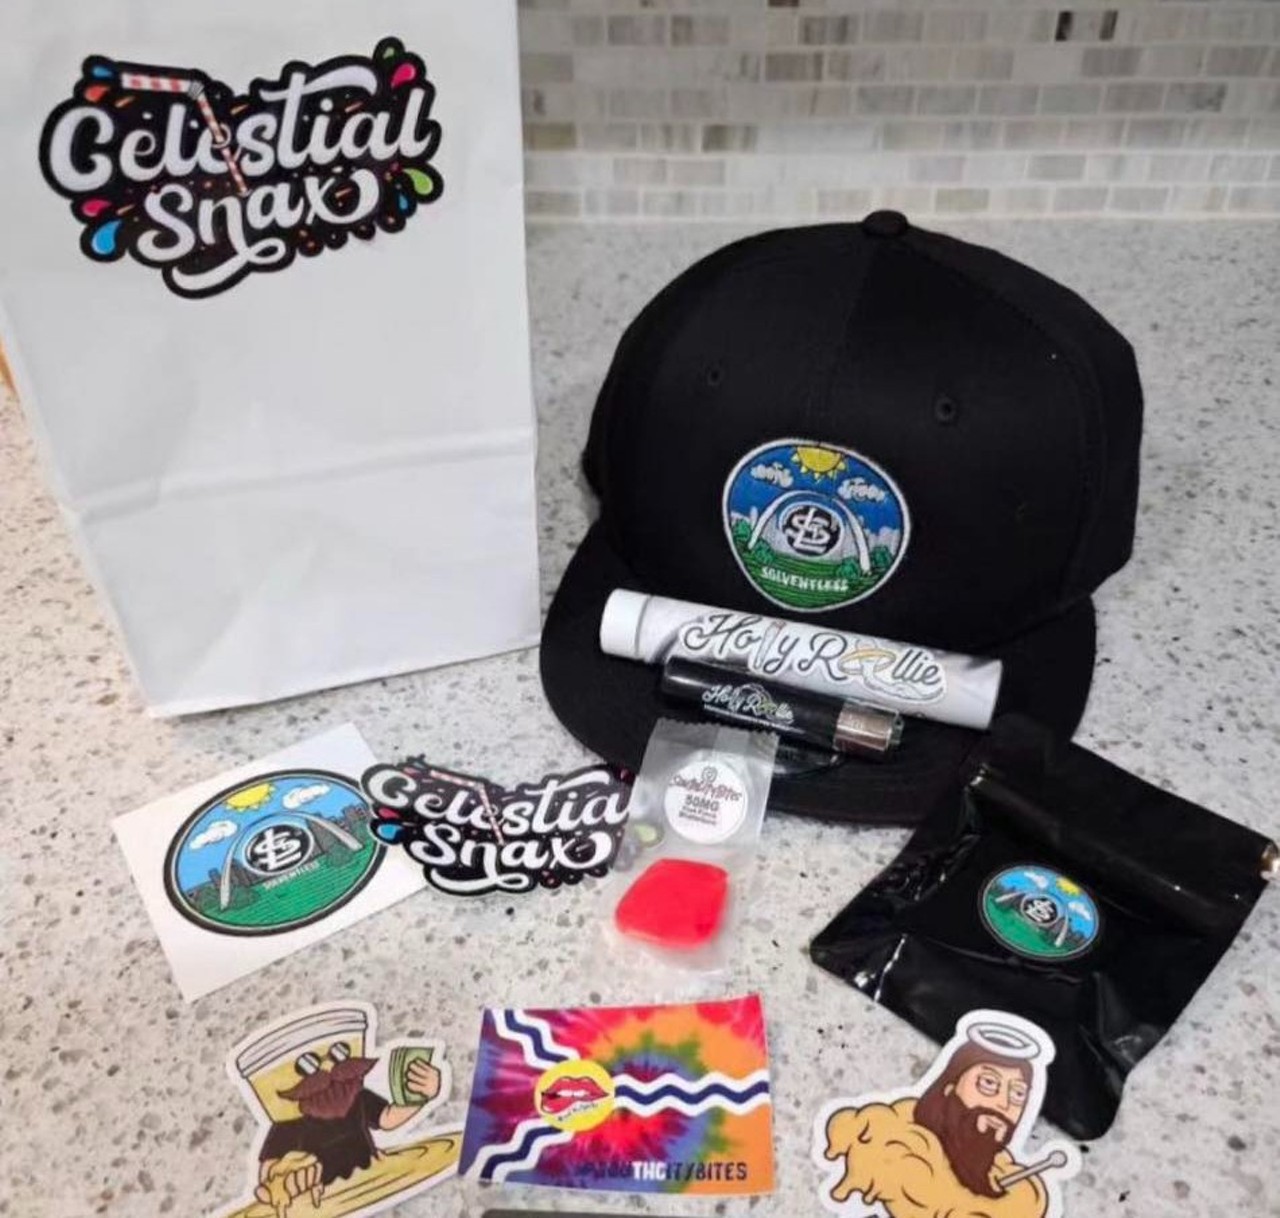 SmokeOutSTL: 420 Sesh
Smoke out St. Louis on April 20 at this year&rsquo;s 420 Sesh at Sister Cities Cajun (3550 South Broadway). From 7 p.m. until midnight, celebrate the smokiest holiday with some Cajun food, a solventless rosin dab bar, live music, a rig raffle, prizes, an infused soda bar, patio games, a private dab room and 20-plus community brands. The first 50 people will receive a free Holy Rollie hash hole and the first 25 will get a free STL Solventless limited-edition lemonade flavor. Tickets are $15 online and $20 at the door. VIP tickets are $80 and can only be purchased online. VIP tickets include a Rig Raffle Ticket, a Holy Rollie, a GodsGreens MoodMat, a Small Batch Bros Lighter, an STL Solventless sample, an STL Solventless cake pop, an STL Solventless lemonade, gift cards and more. Tickets are available at eventbrite.com/e/smokeoutstl-420-sesh-tickets-851678452177 with the first 40 people to register receiving $5 off.